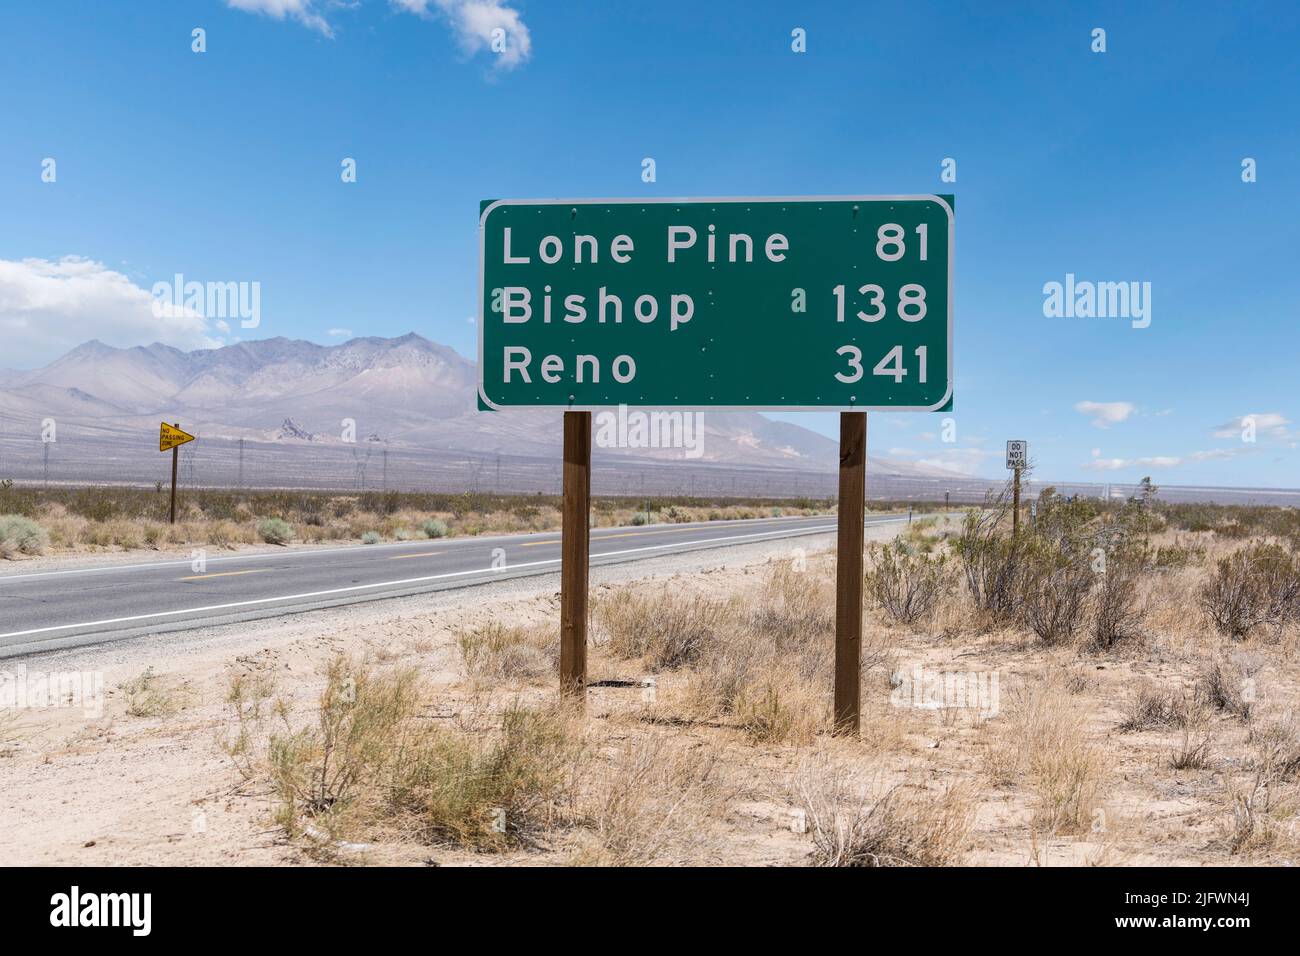 Highway sign to Lone Pine, Bishop and Reno on scenic US Route 14 in the Mojave desert area of California. Stock Photo